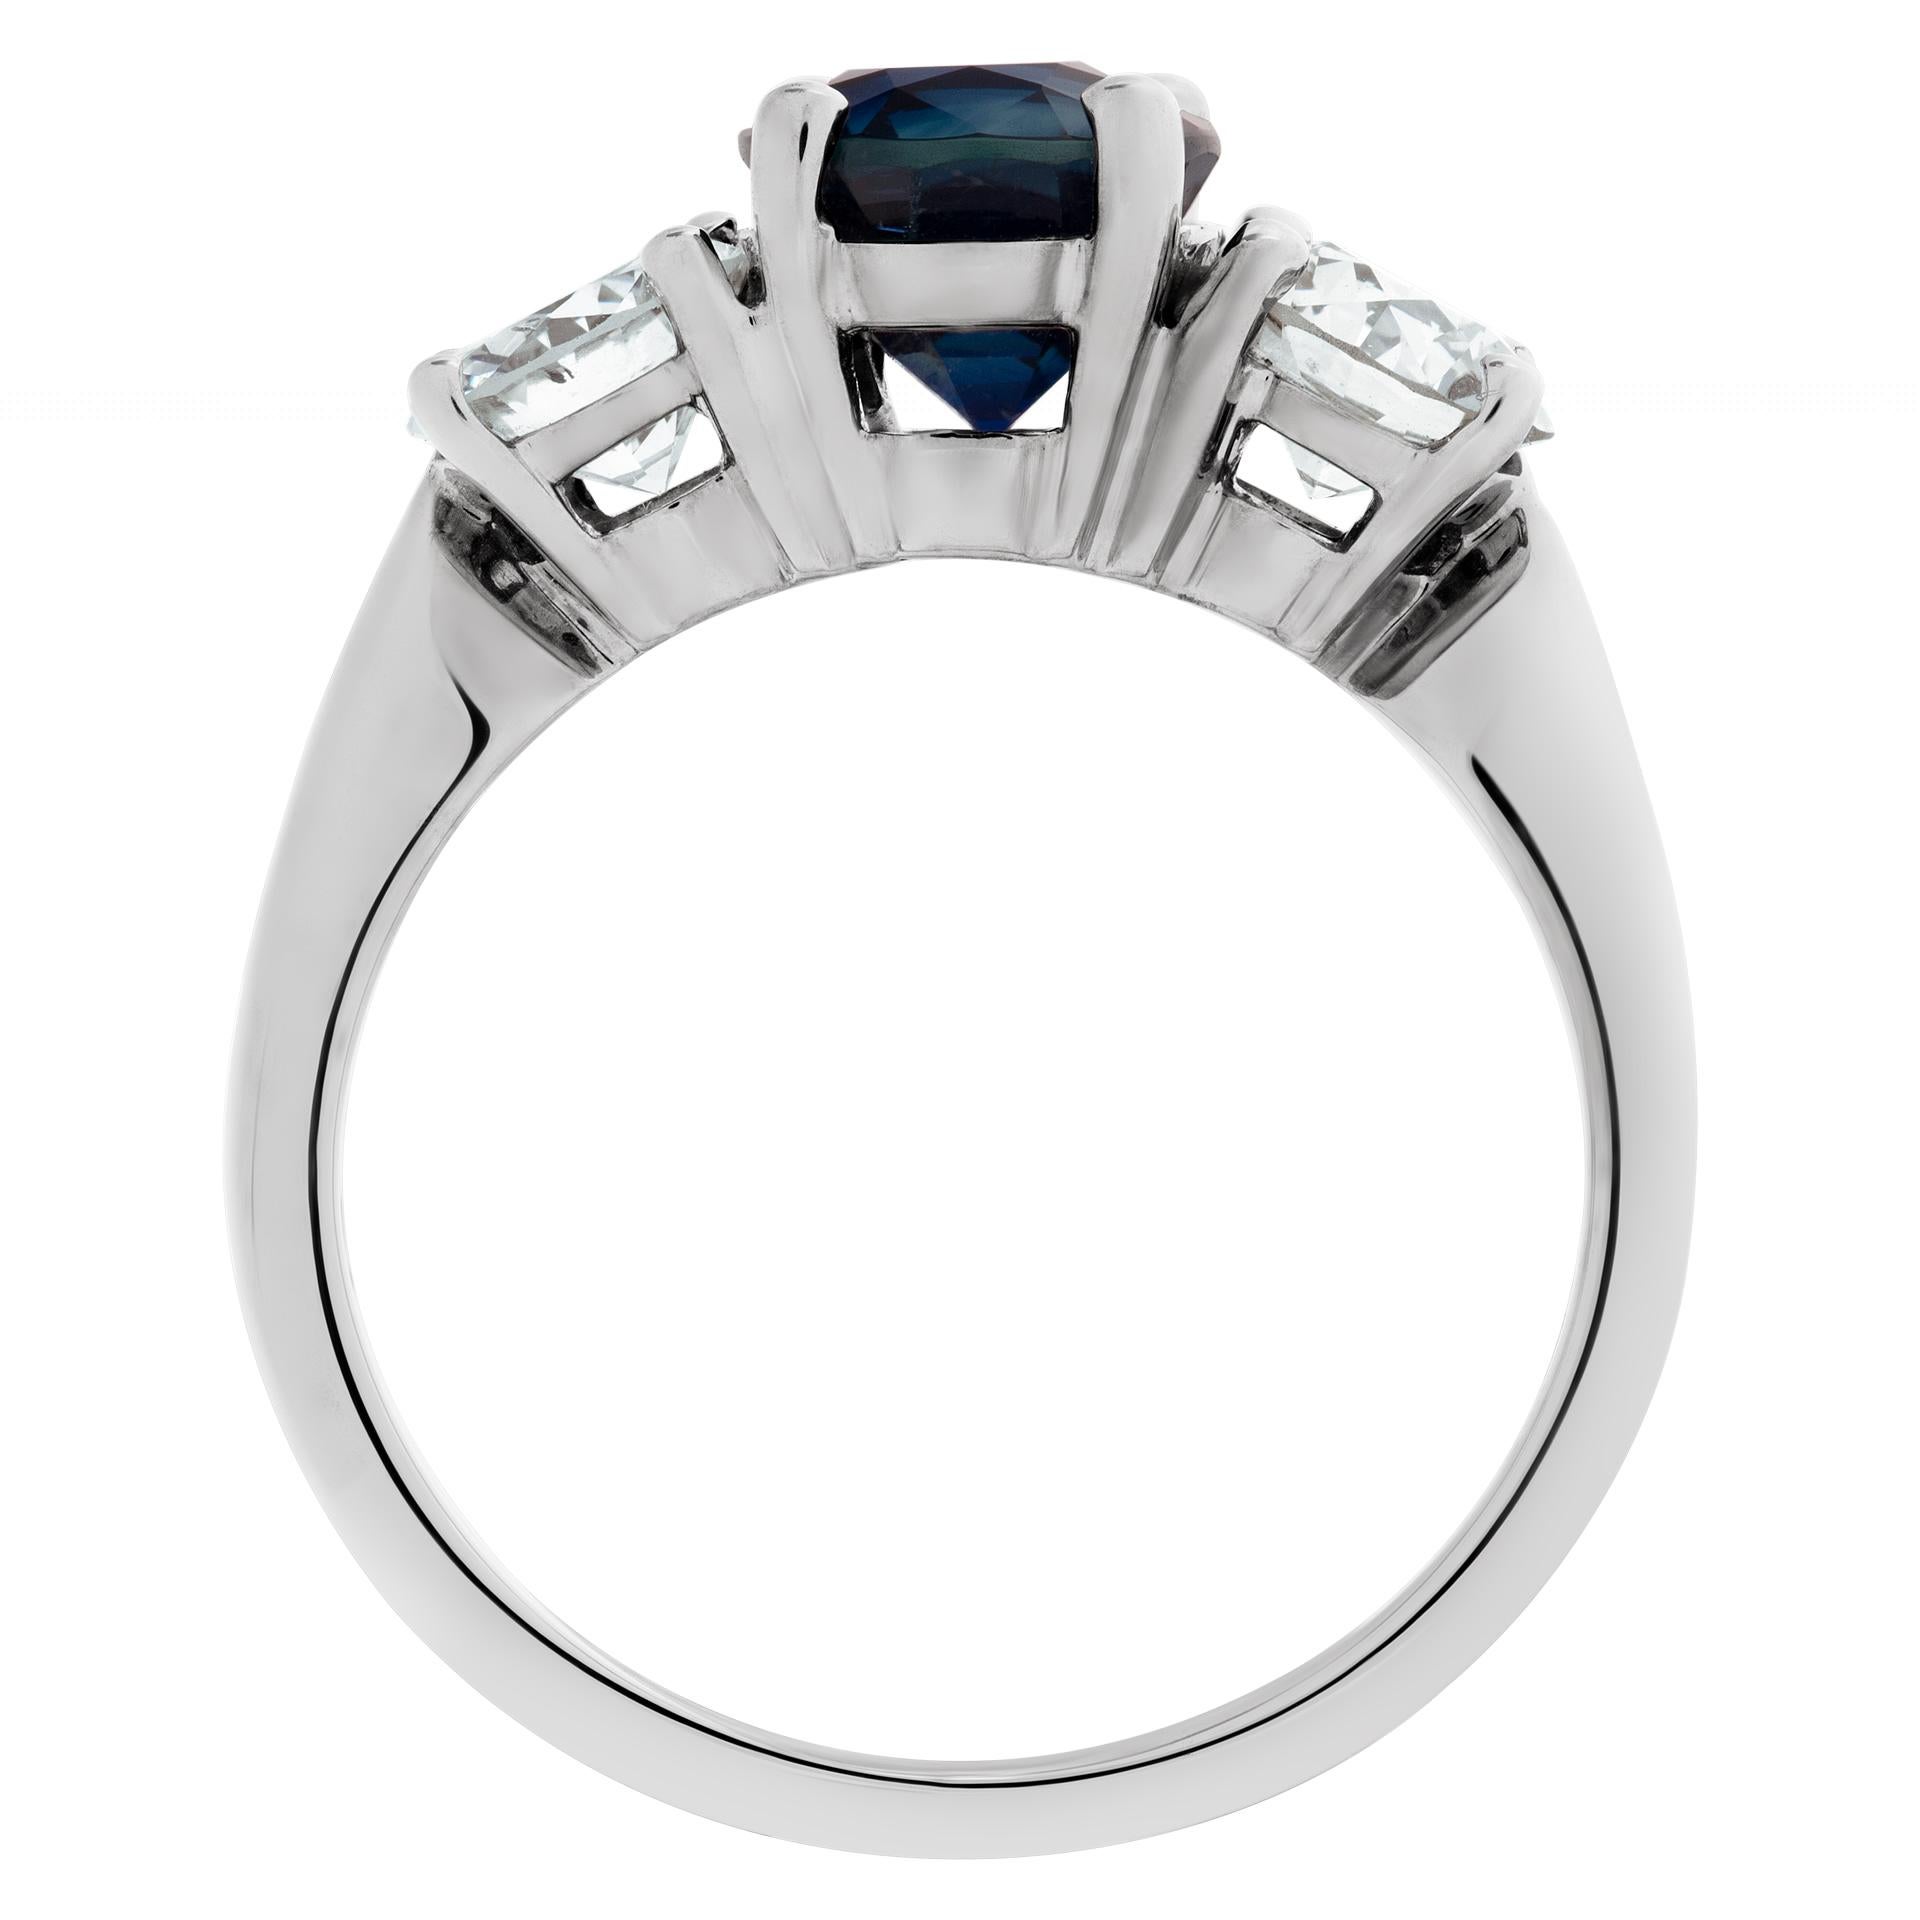 Oval Cut Sapphire & Diamond Ring in 14k White Gold, 1.92 Ct AGL Certified Unheated For Sale